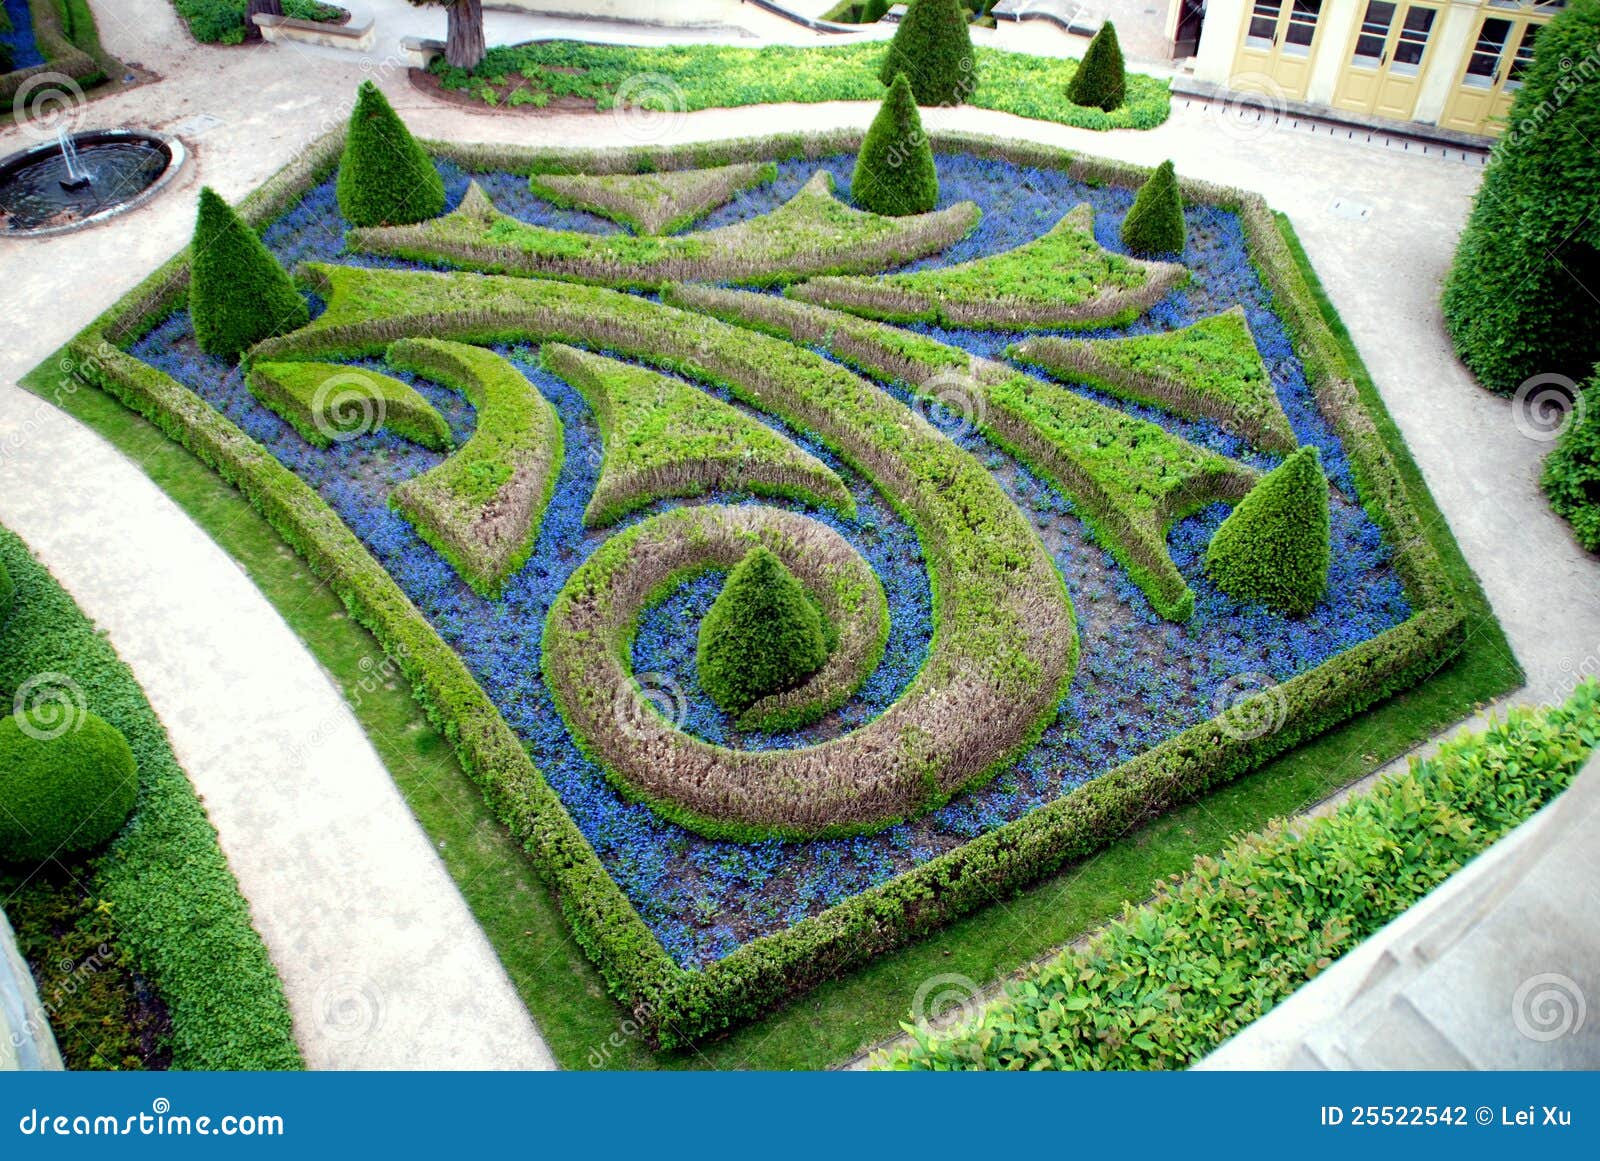 Featured image of post Knot Garden Images : A knot garden is a garden of very formal design in a square frame, consisting of a variety of aromatic plants and culinary herbs including germander, marjoram, thyme, southernwood, lemon balm, hyssop, costmary, acanthus, mallow, chamomile, rosemary, calendula, viola and santolina.